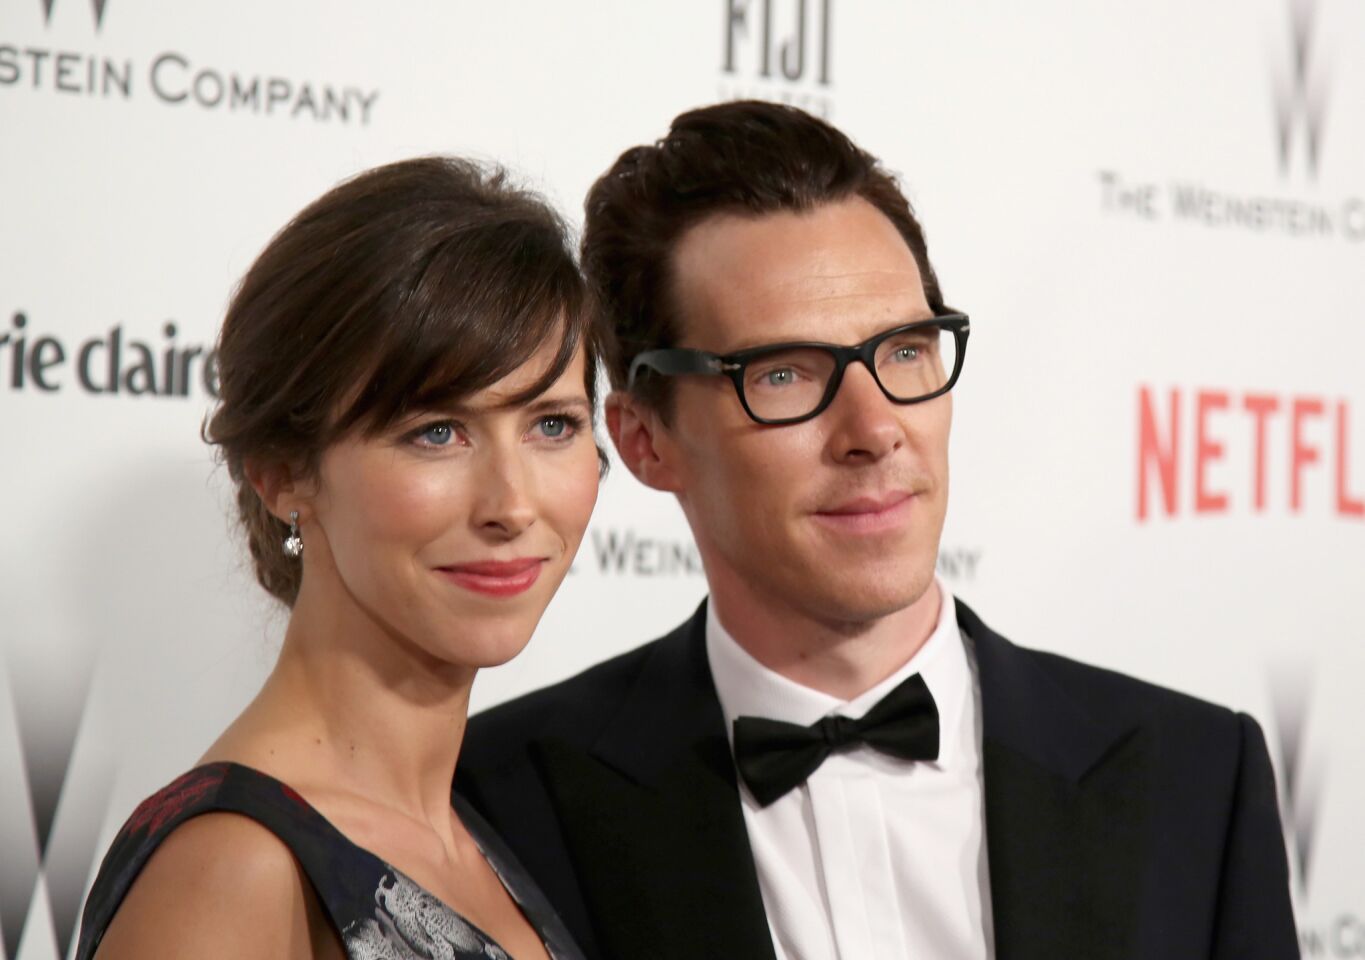 Benedict Cumberbatch can add the role of father to his long list of accomplishments. He and theater director Sophie Hunter welcomed a baby boy, after having married four months prior. The pair met on the set of the 2009 thriller "Burlesque Fairytales."